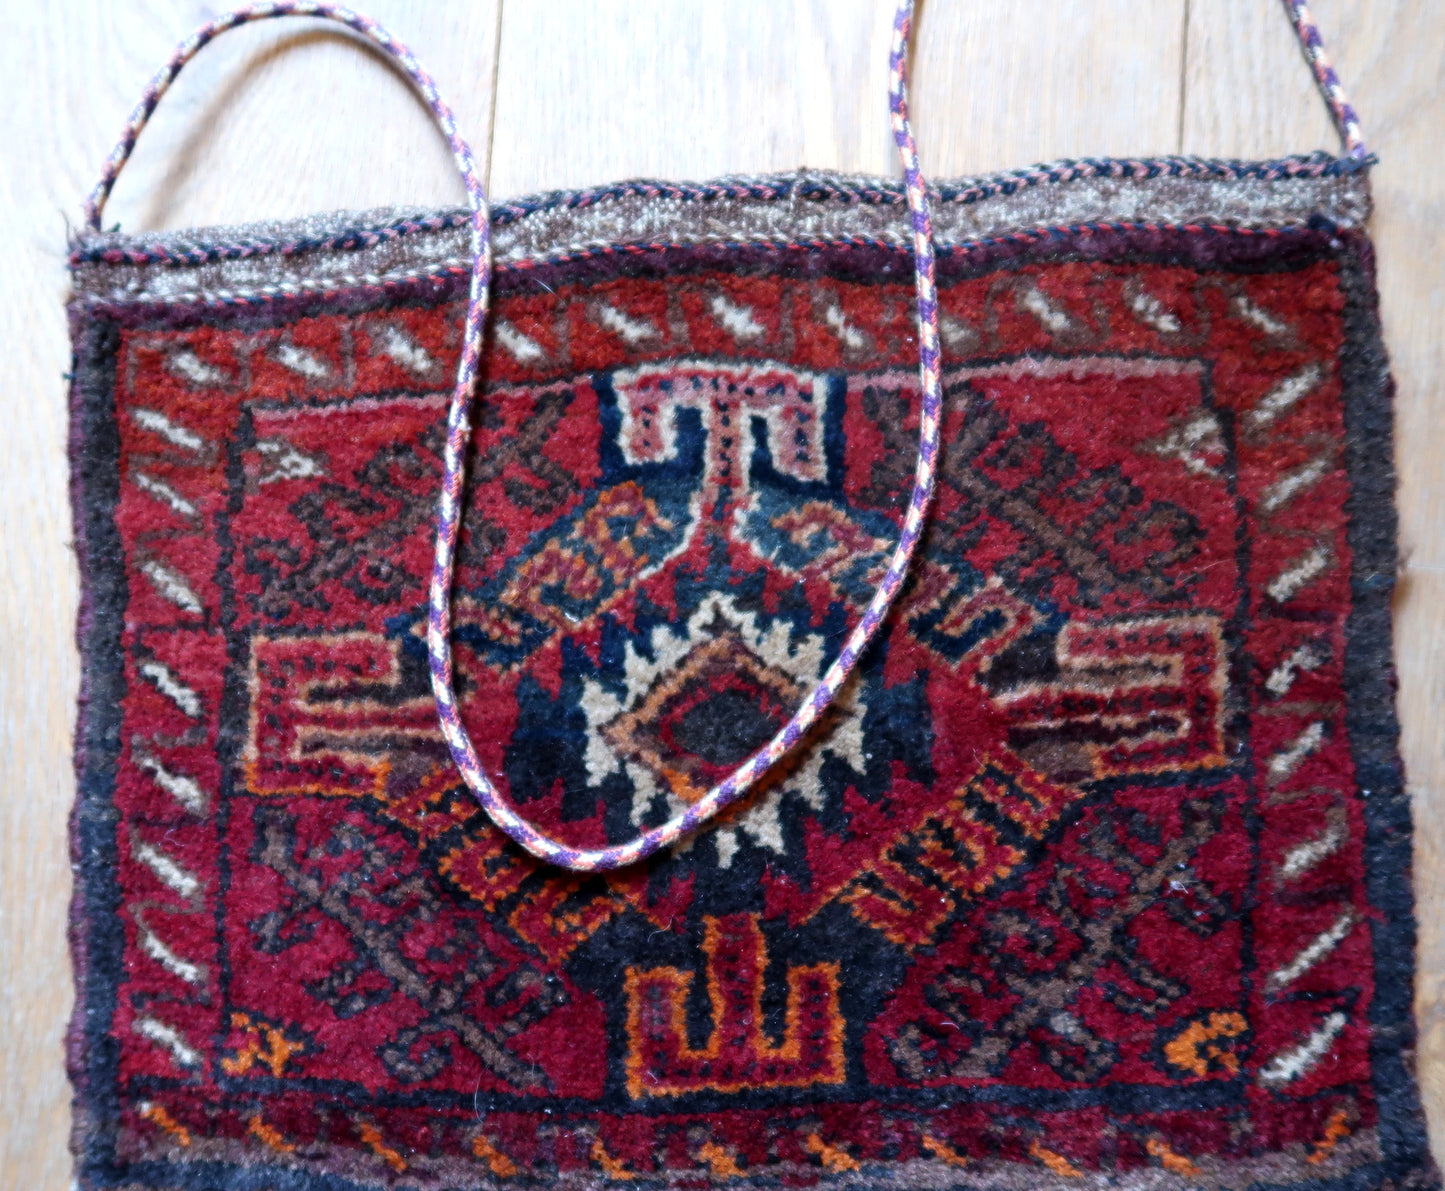 Handmade vintage Uzbek Salt bag in red color and large medallion. The bag is from the end of 20th century in original good condition. The handle has been attached to it, it can be removed or used as a regular handbag.